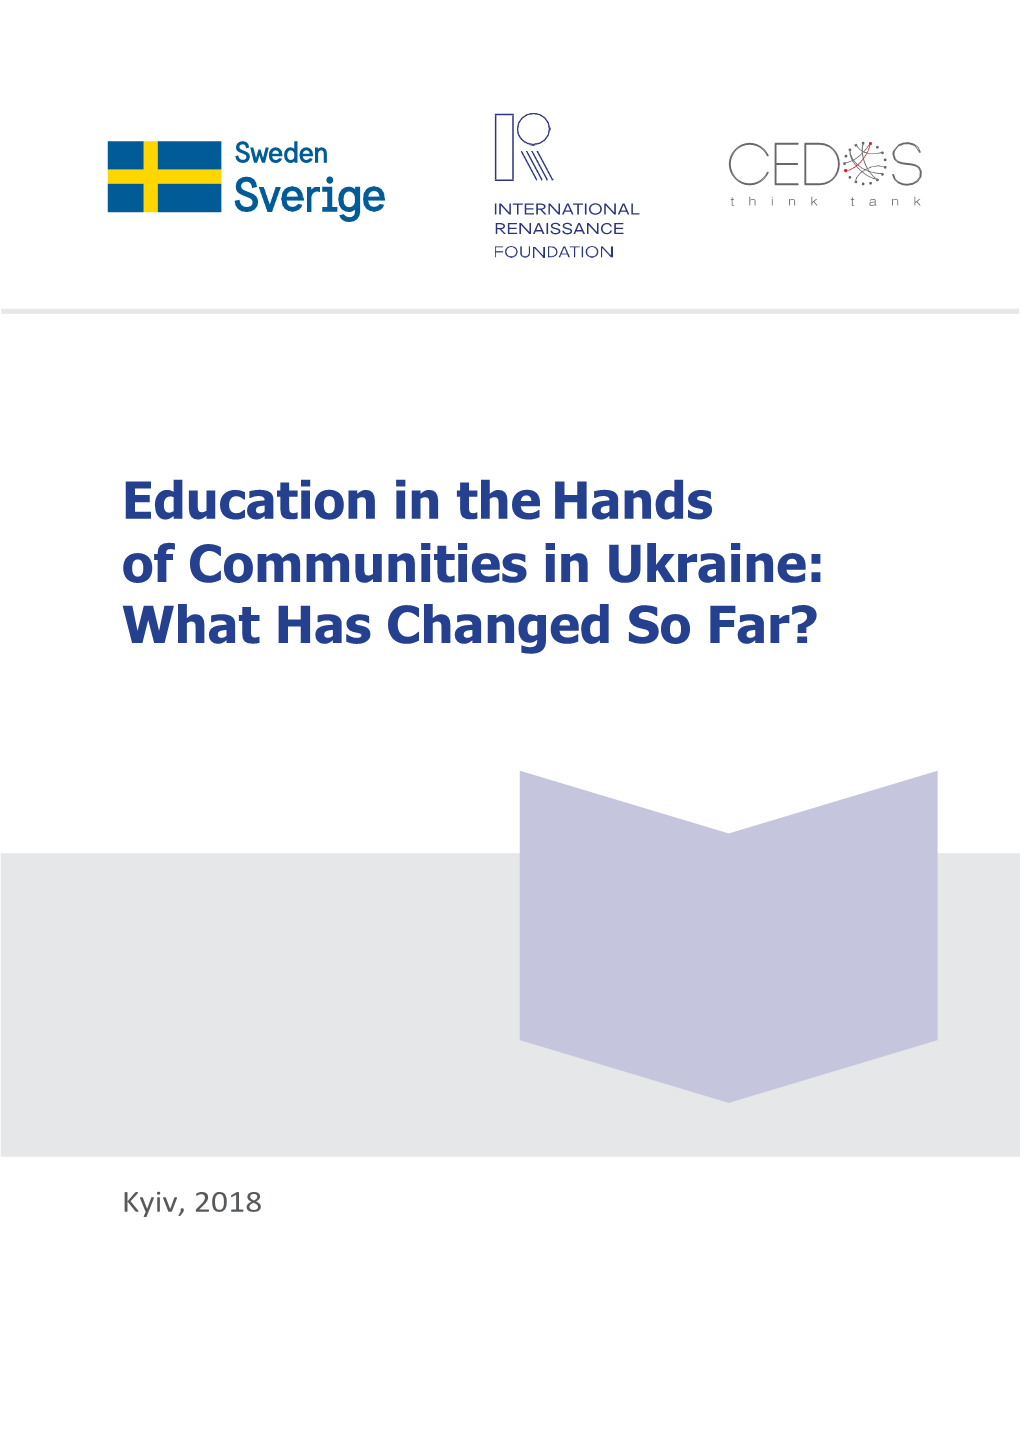 Education in the Hands of Communities in Ukraine: What Has Changed So Far?